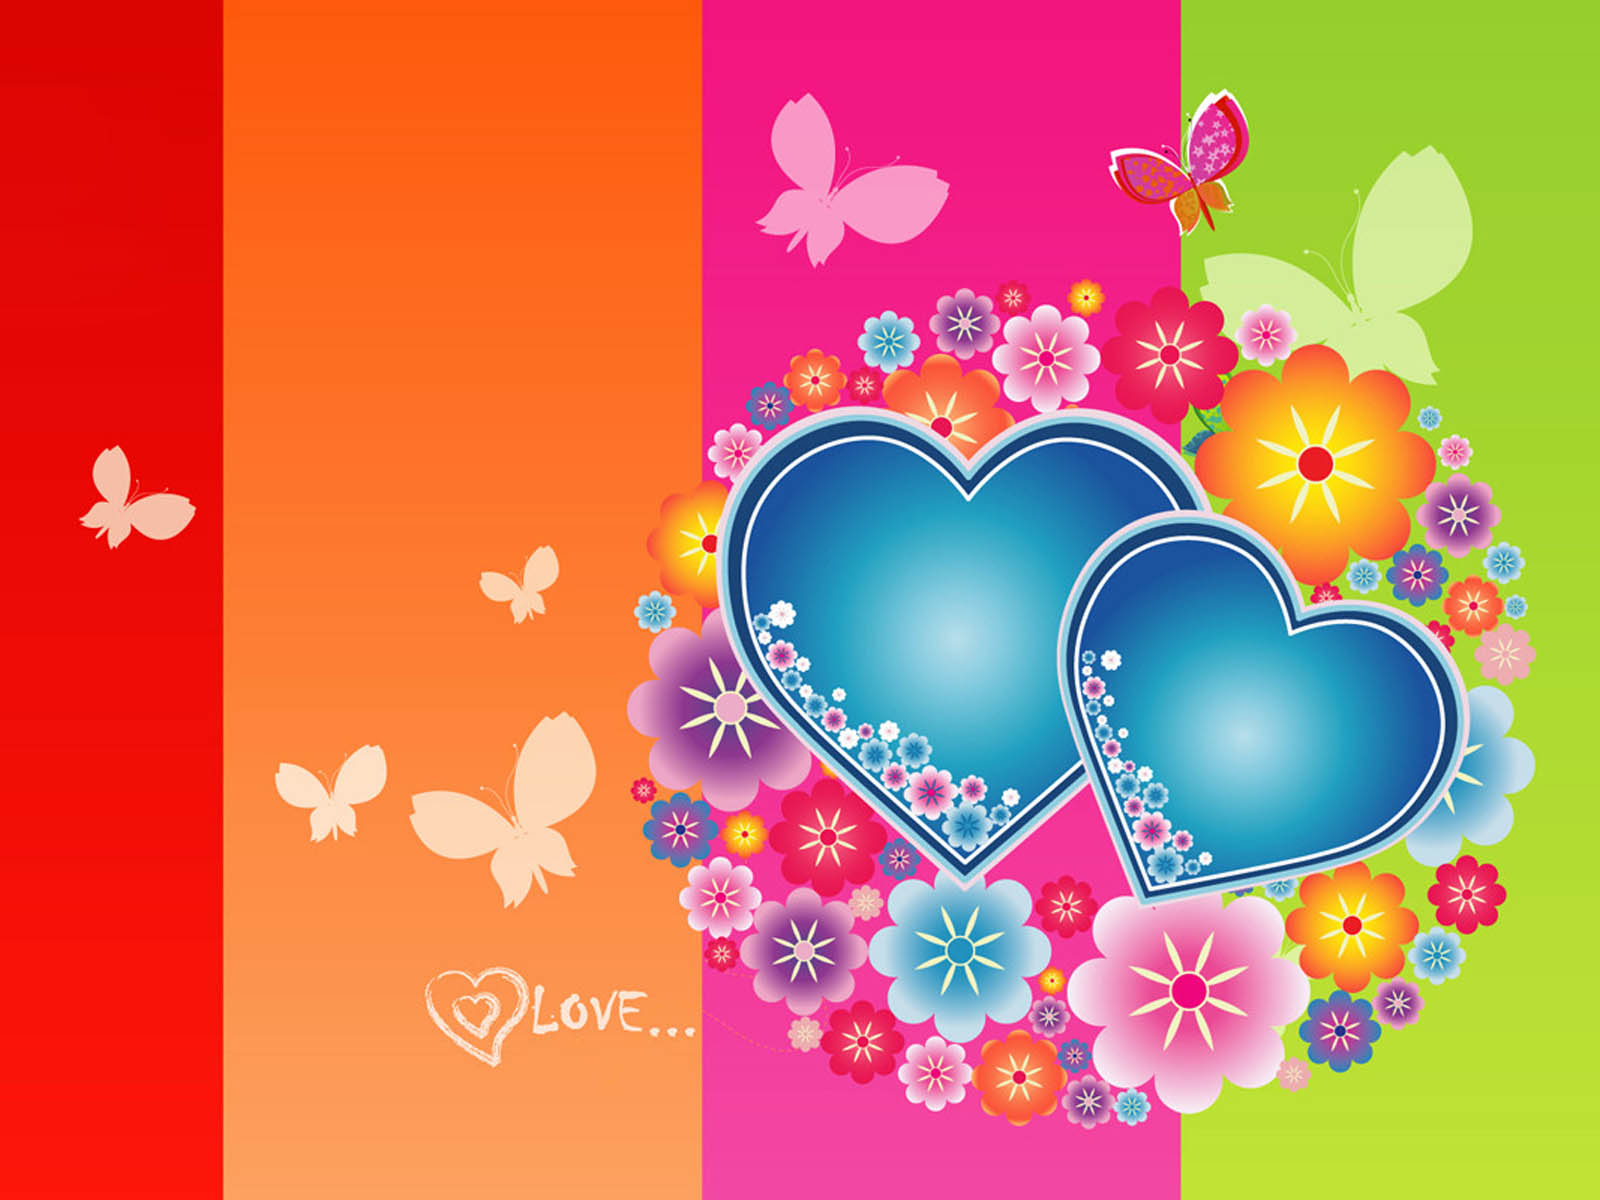 Love Hearts Backgrounds Wallpaper Download 1600x1200PX Love